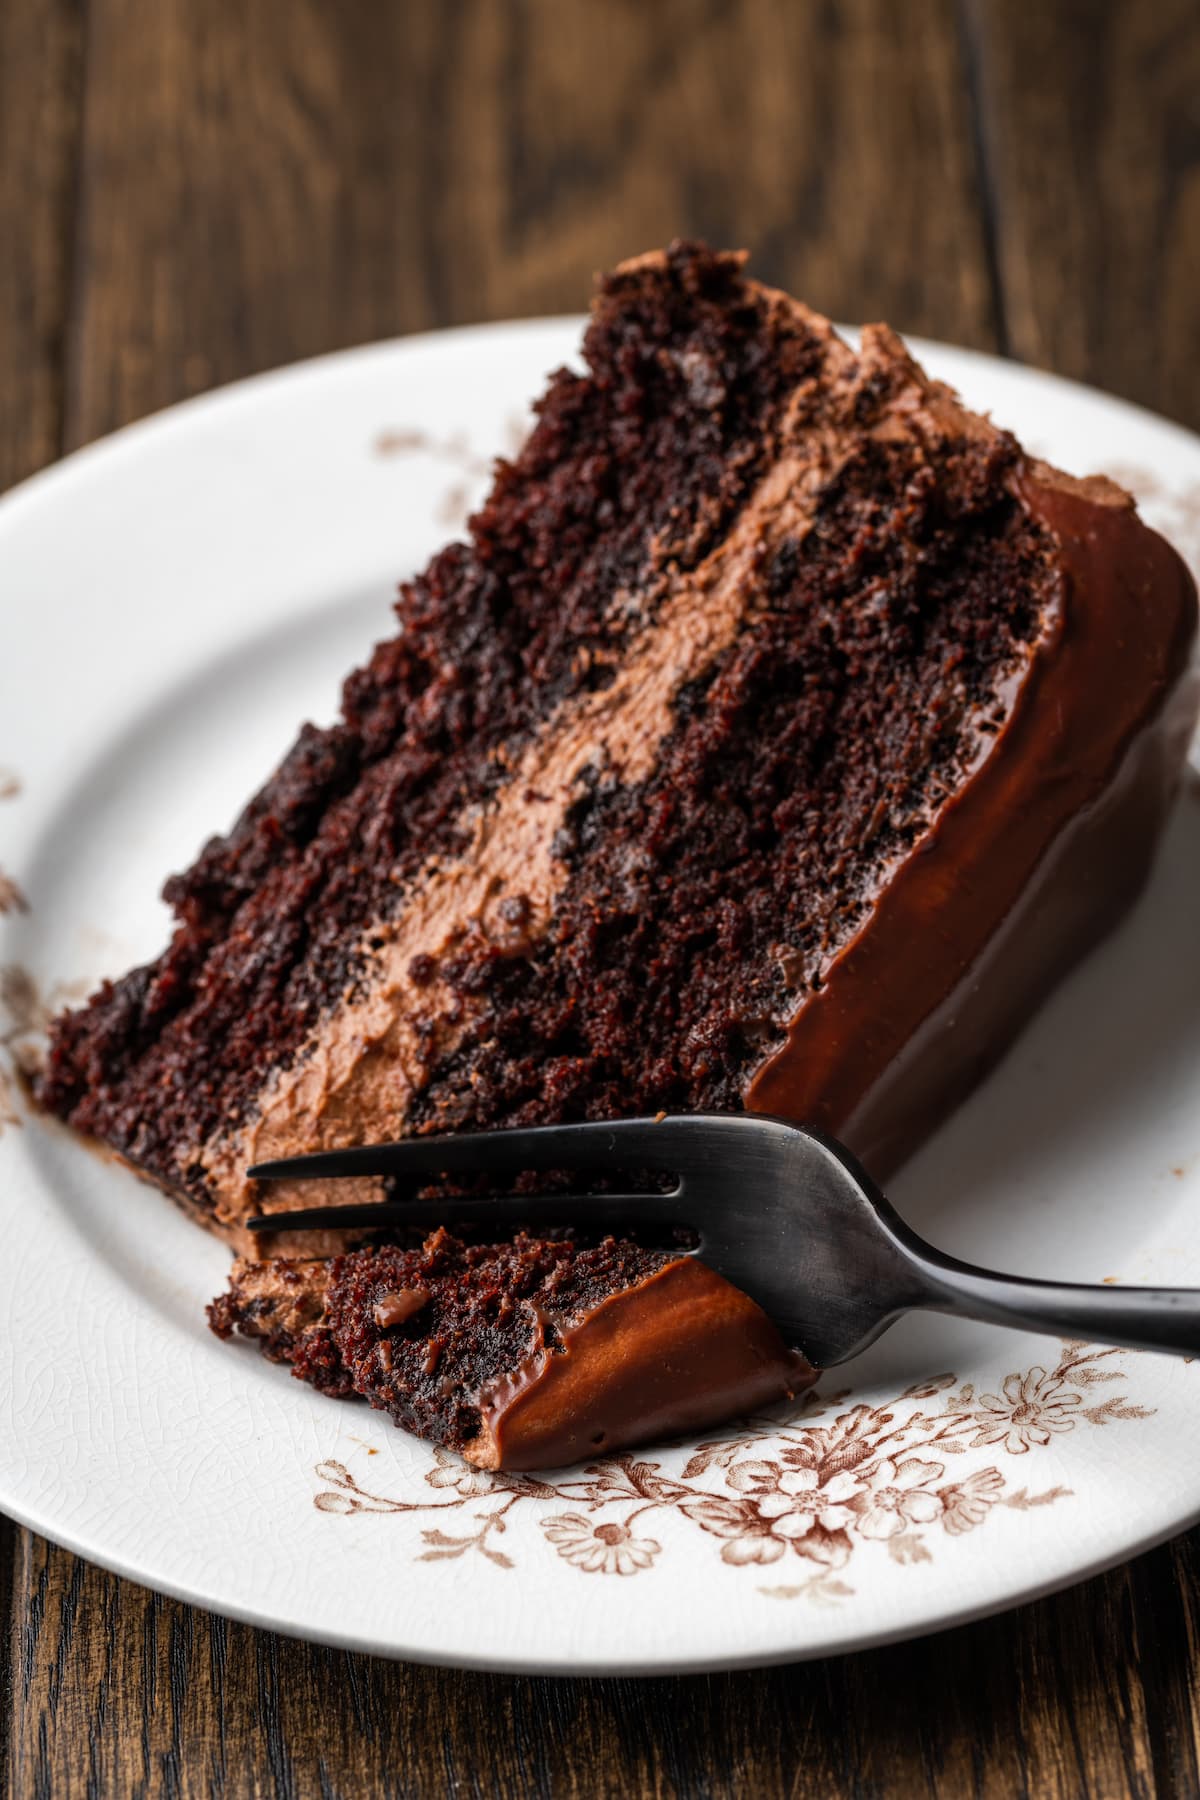 A forkful of chocolate cake next to a slice of chocolate layer cake on a white plate.